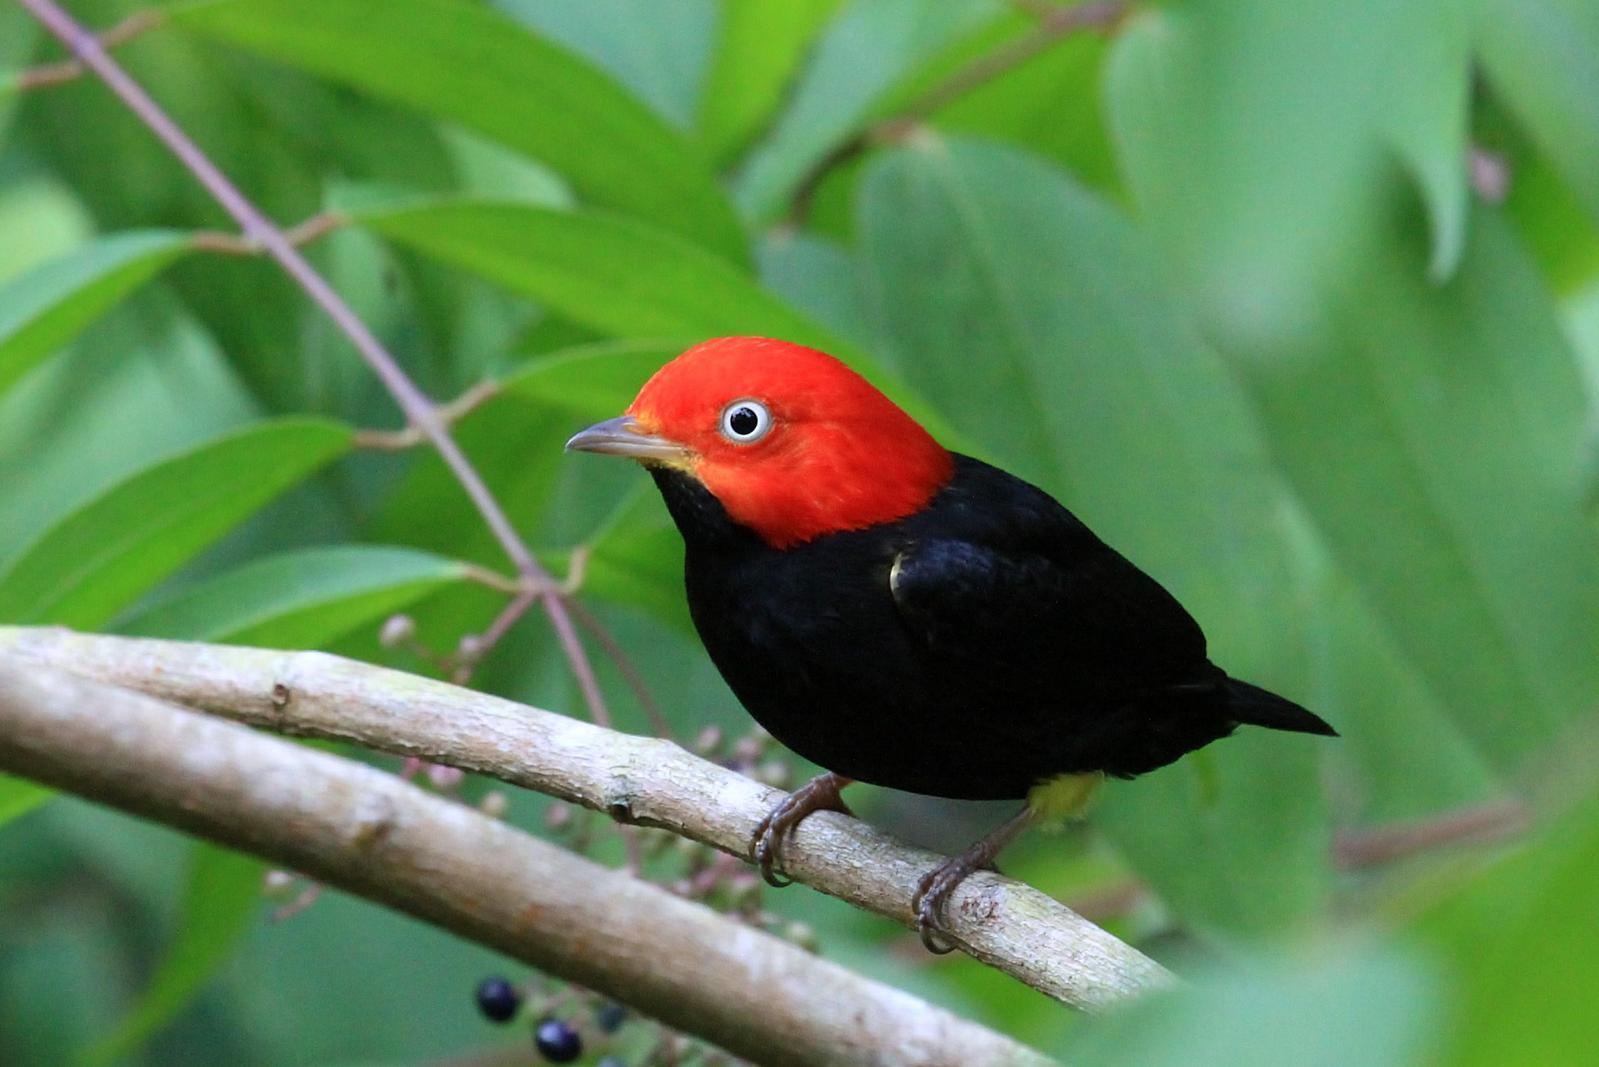 Red-capped Manakin Photo by Matthew McCluskey